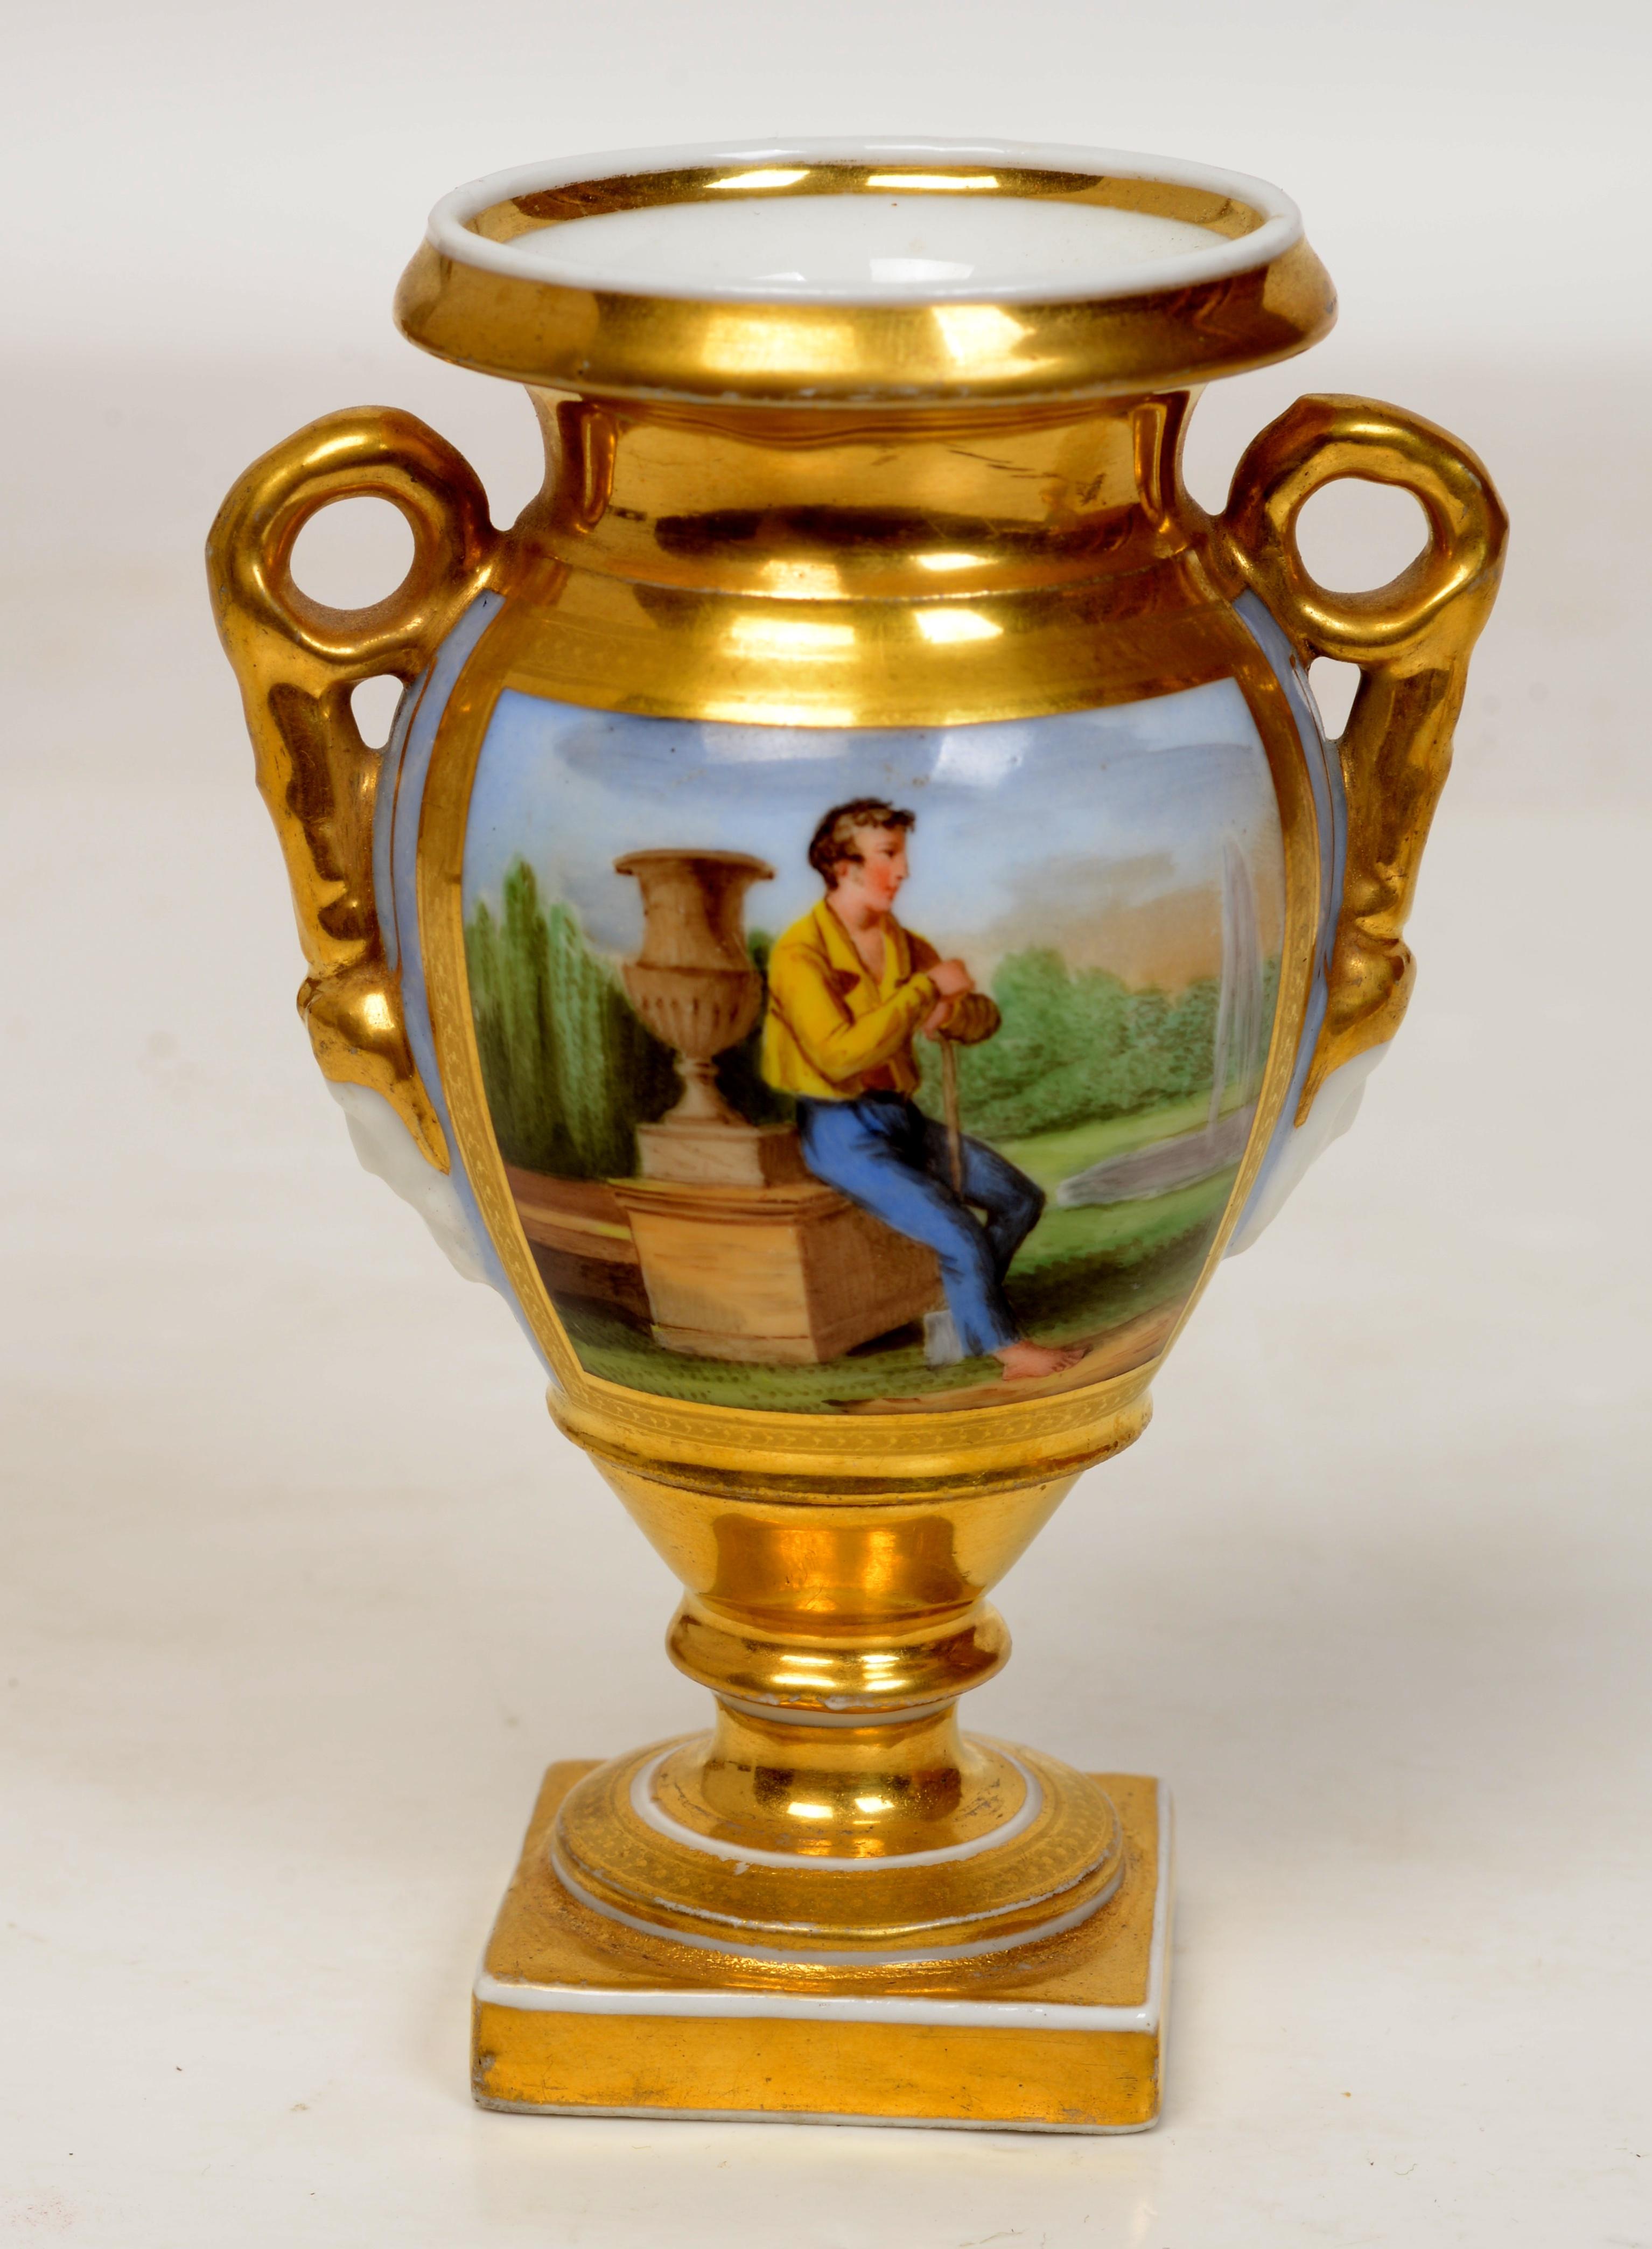 Porcelain Pr. of Old Paris Miniature, Gilt Decorated Footed Urns With Garden Scenes, c1800 For Sale